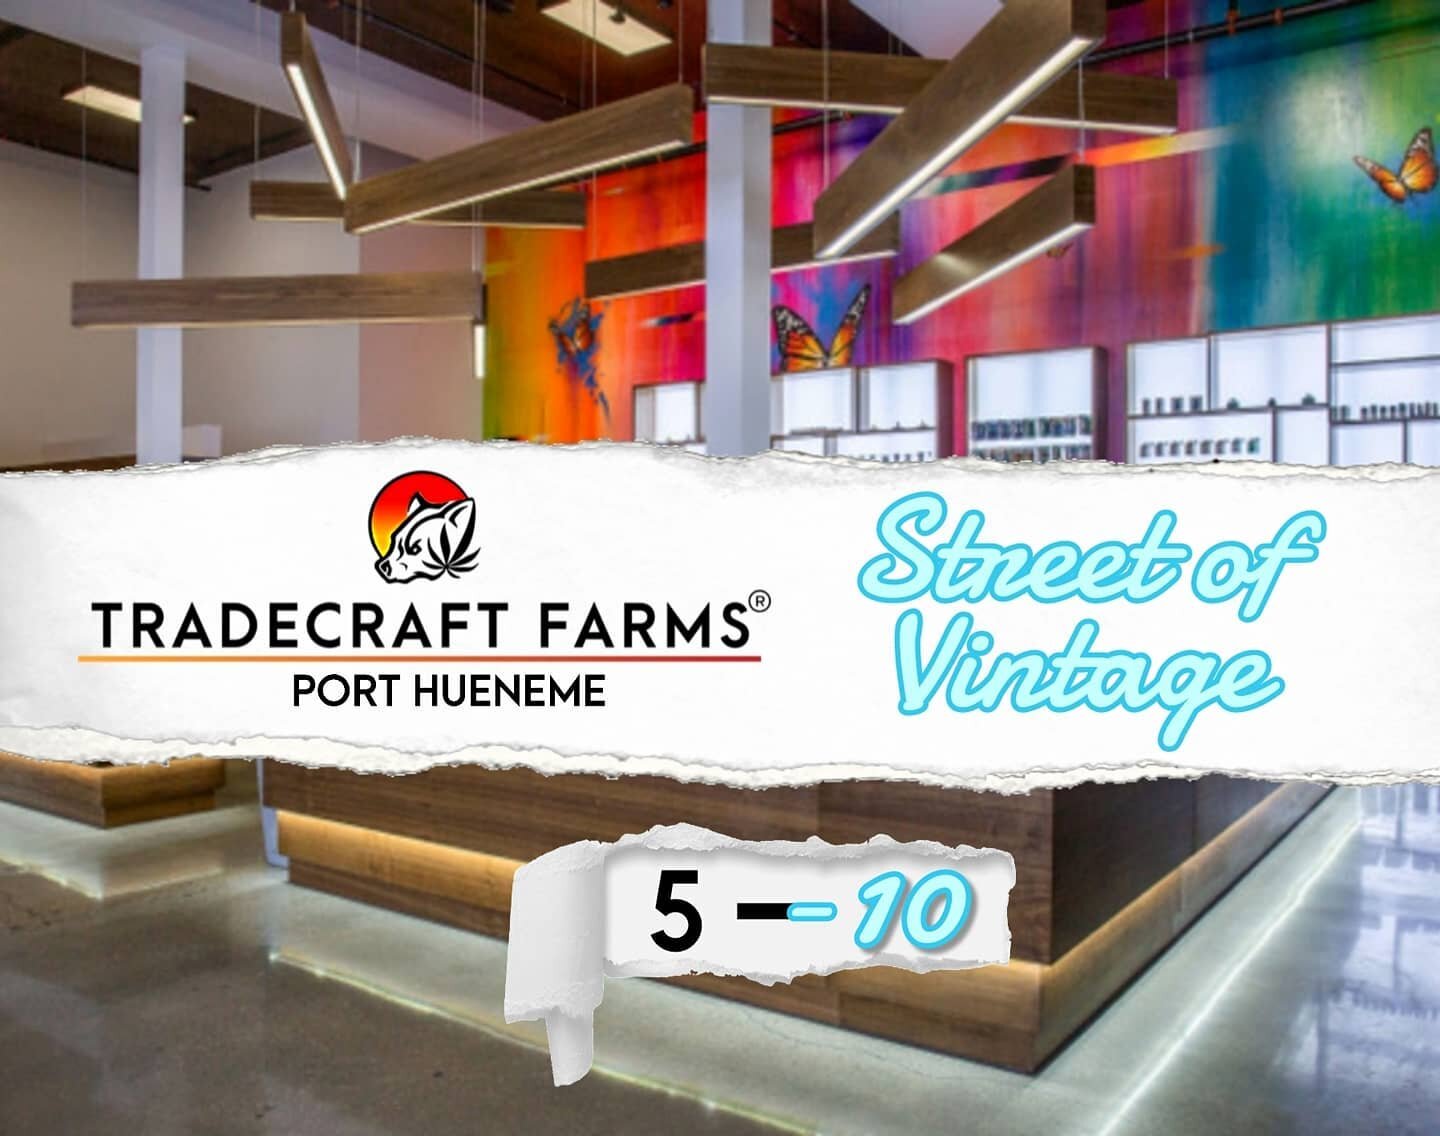 Stop by @streetsofvintagefleamarket on Friday! We will have a booth from 5-10 😎
#streetsofvintage 
#tradecraftfarmsporthueneme 
#tradecraftfarms 
#PortHueneme 
#oxnard 
#fleamarket